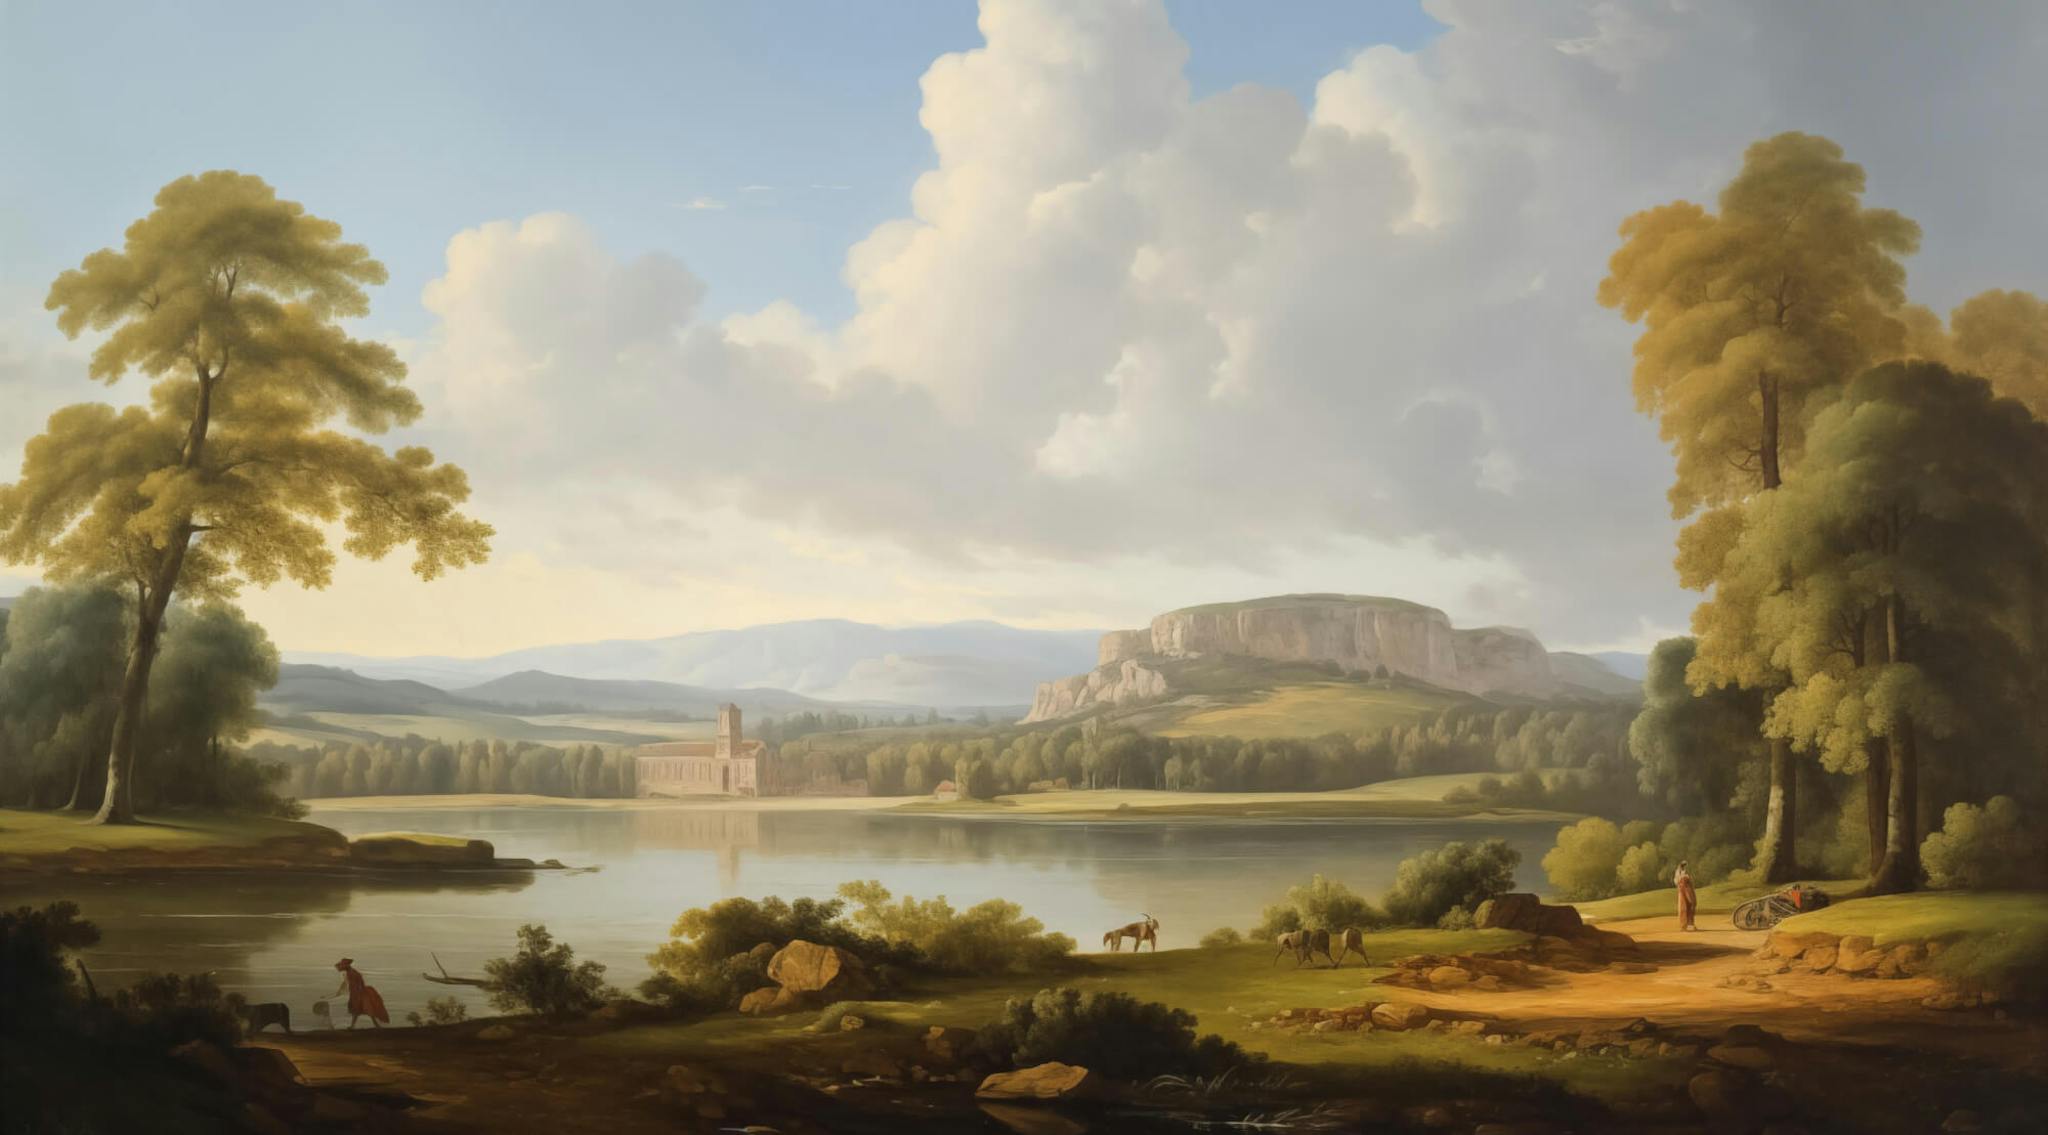 A painting of a 19th-century landscape, characteristic of the Romantic era.